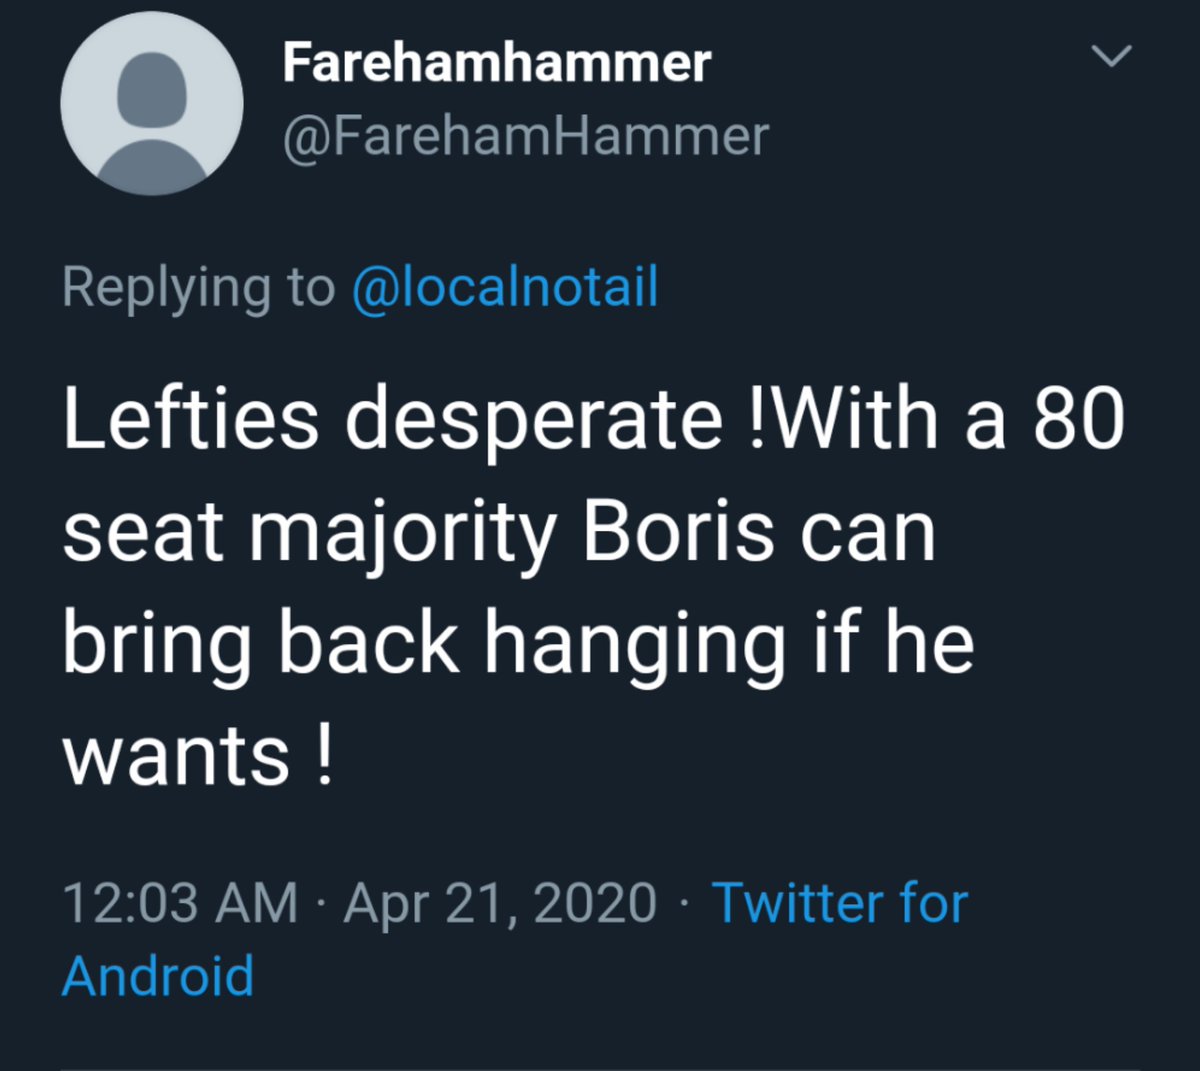 For instance, this account is pathologically obsessed with abusing Anna Soubry  https://mobile.twitter.com/search?q=Anna%20(from%3A%40FarehamHammer)&src=typed_query&f=live